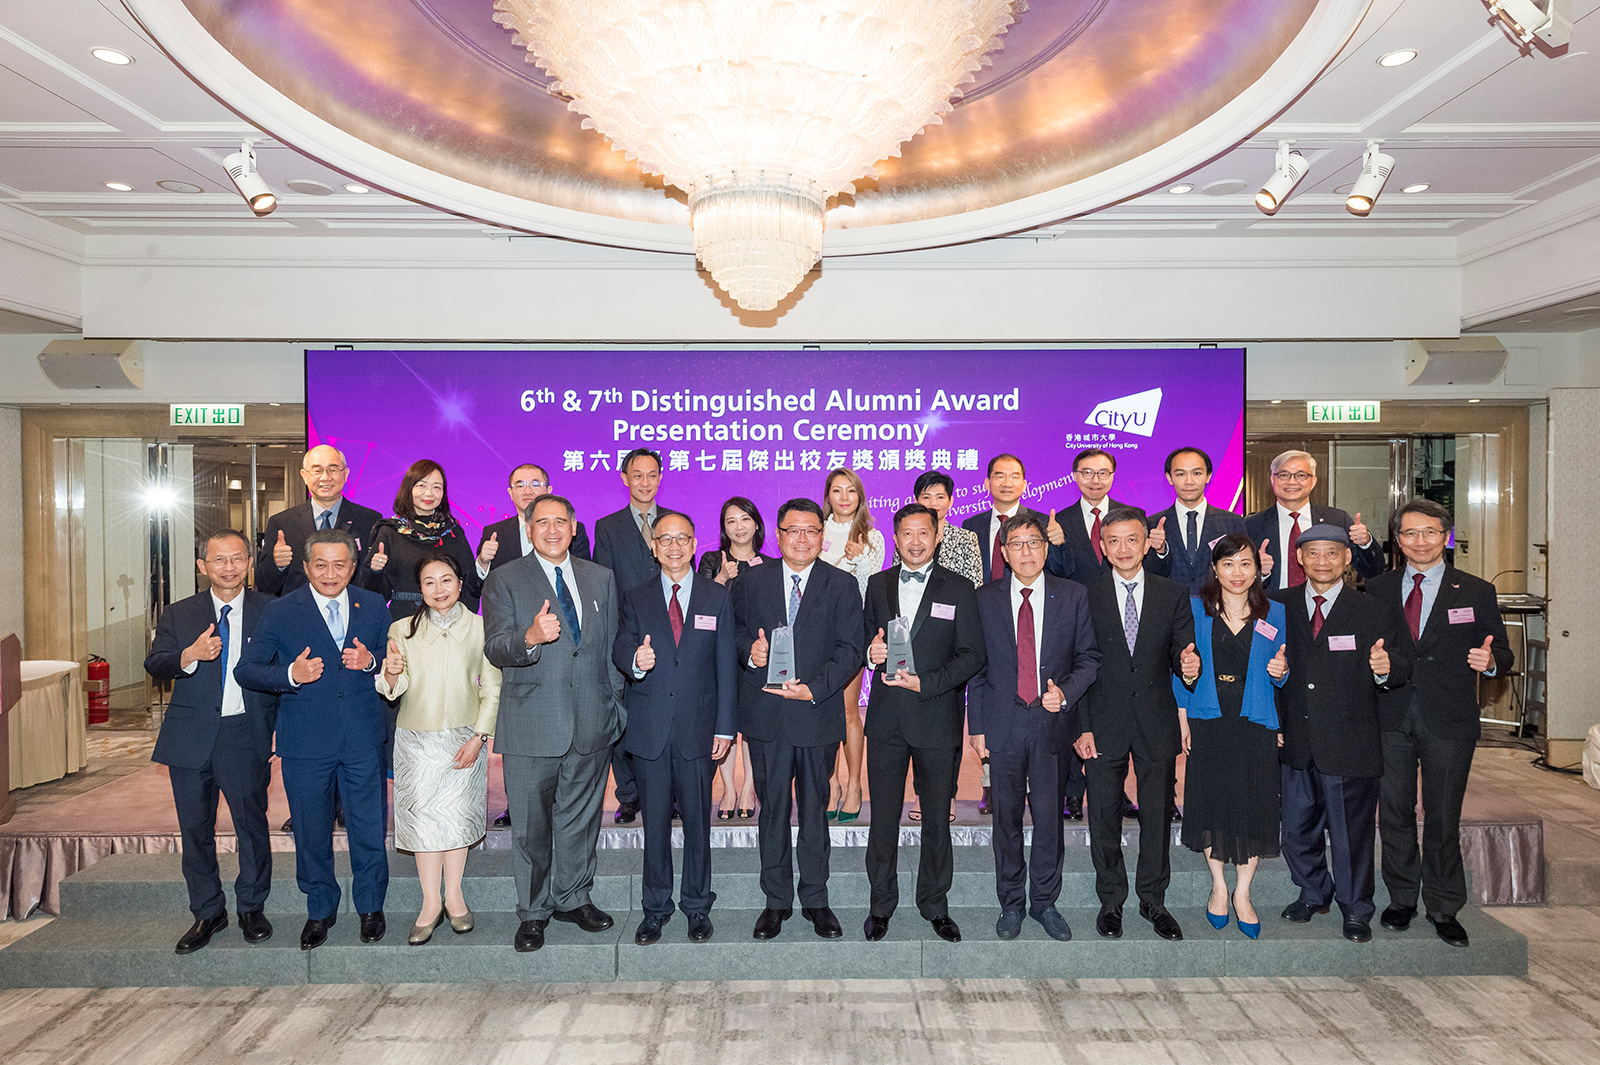 Guests including University management, members of the 6th and 7th Selection Panel and past Distinguished Alumni Award recipients celebrate with Mr Hui and Dr Chai at the presentation ceremony.